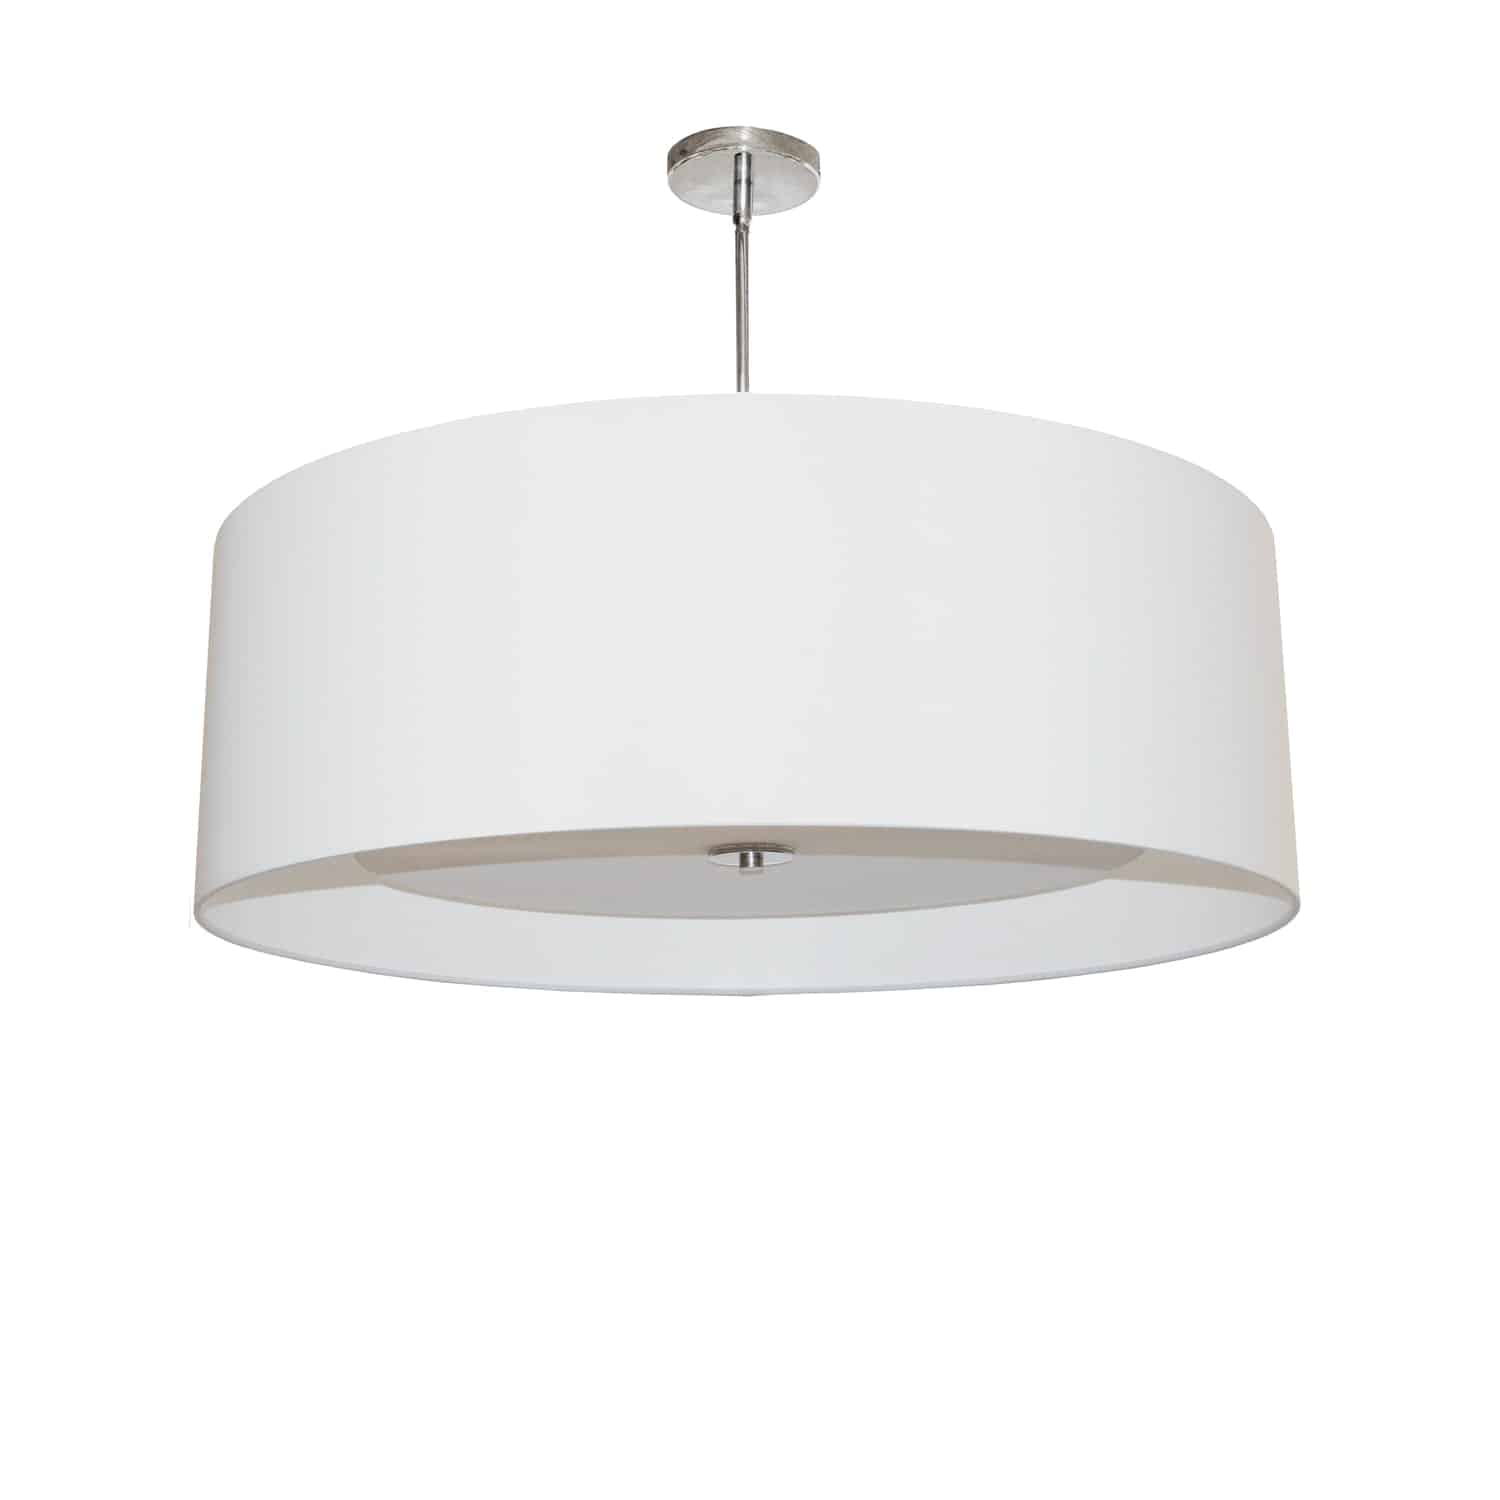 The eye is drawn to the polished minimalism of the Helena family of lighting. The effect is subtle and stylish, making a statement in luxury for discerning tastes.  A minimalist frame in metal with a polished chrome finish is overshadowed by a large drum-style fabric shade in your choice of color. Inside the shade, a white fabric diffuser creates softer, skin-friendly lighting. The look can be set flush to the ceiling for an even more understated effect. Helena lighting adds a fashionable note to your foyer or dining room area, without taking the spotlight away from your overall décor scheme.